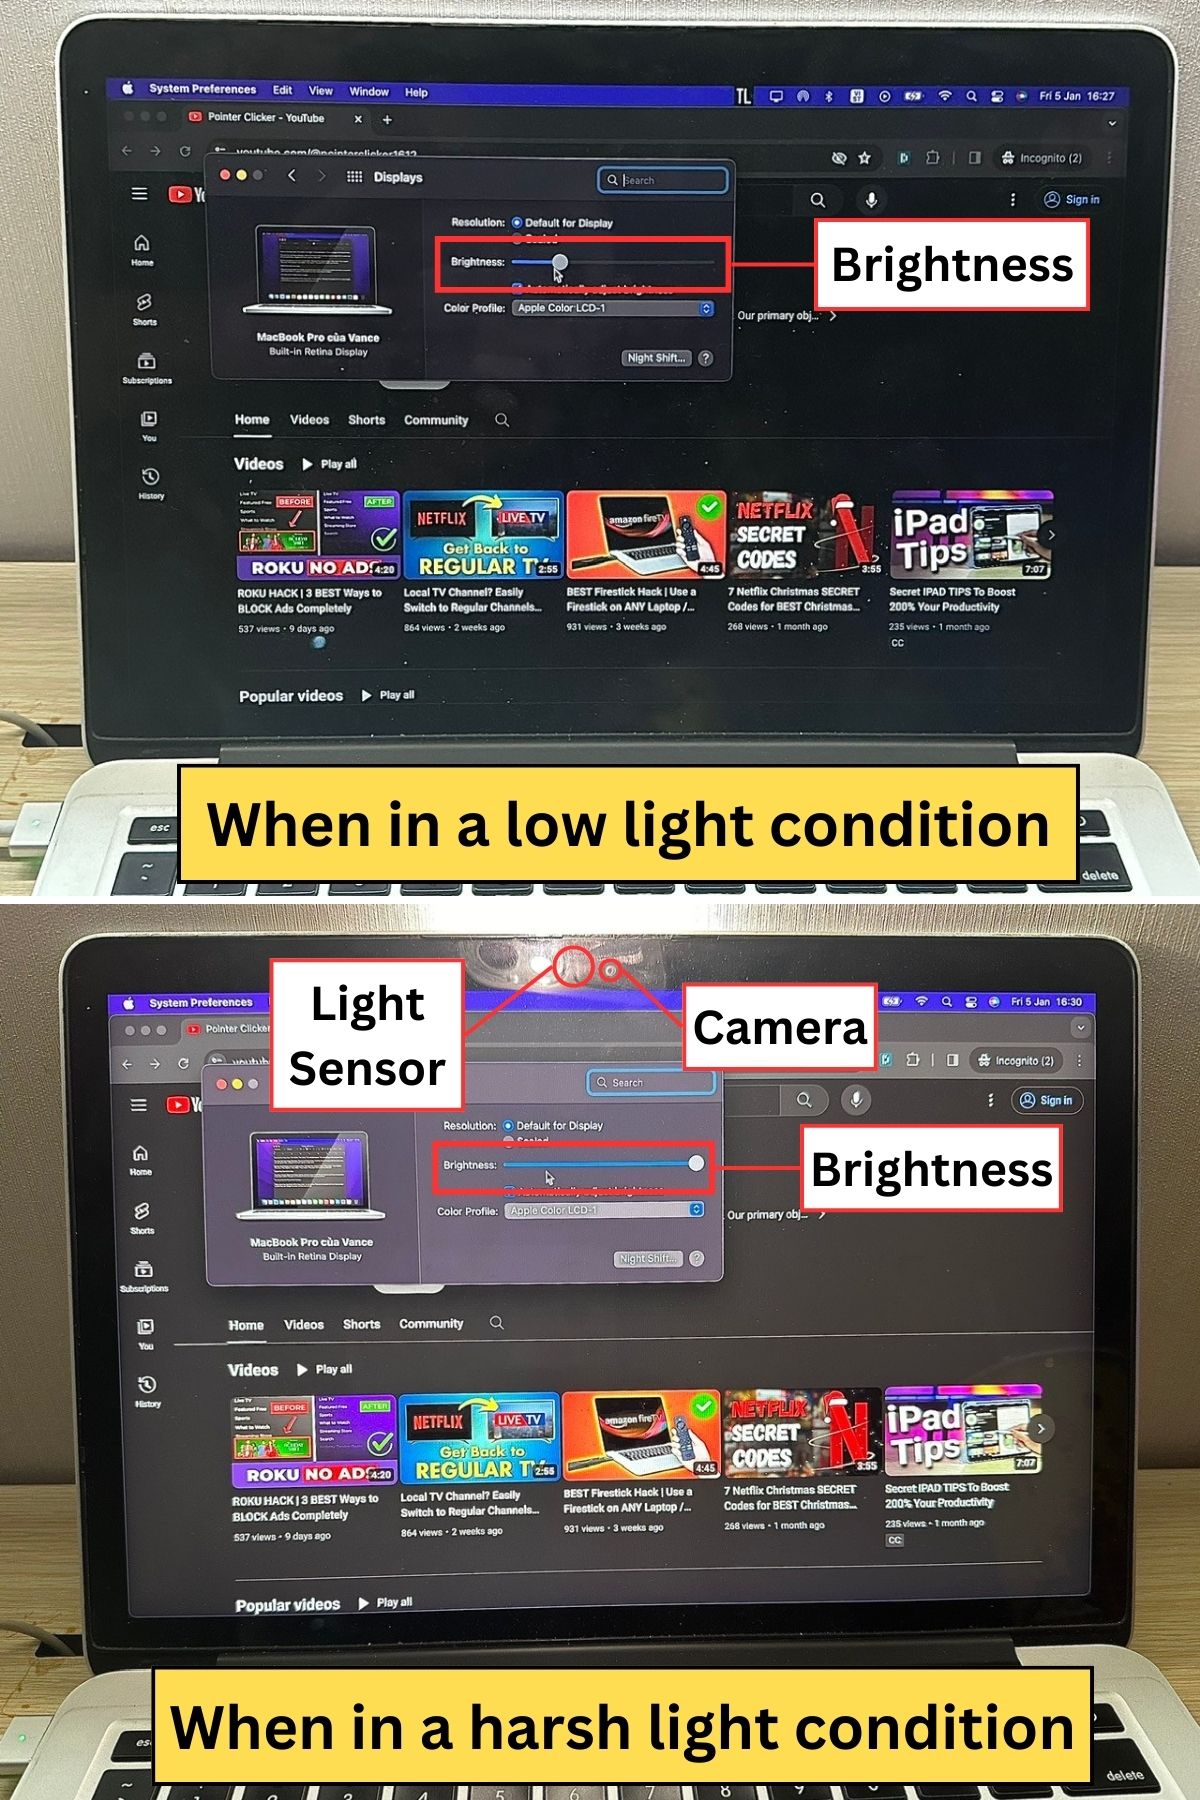 macbook's brightness changes automatically when light condition changes